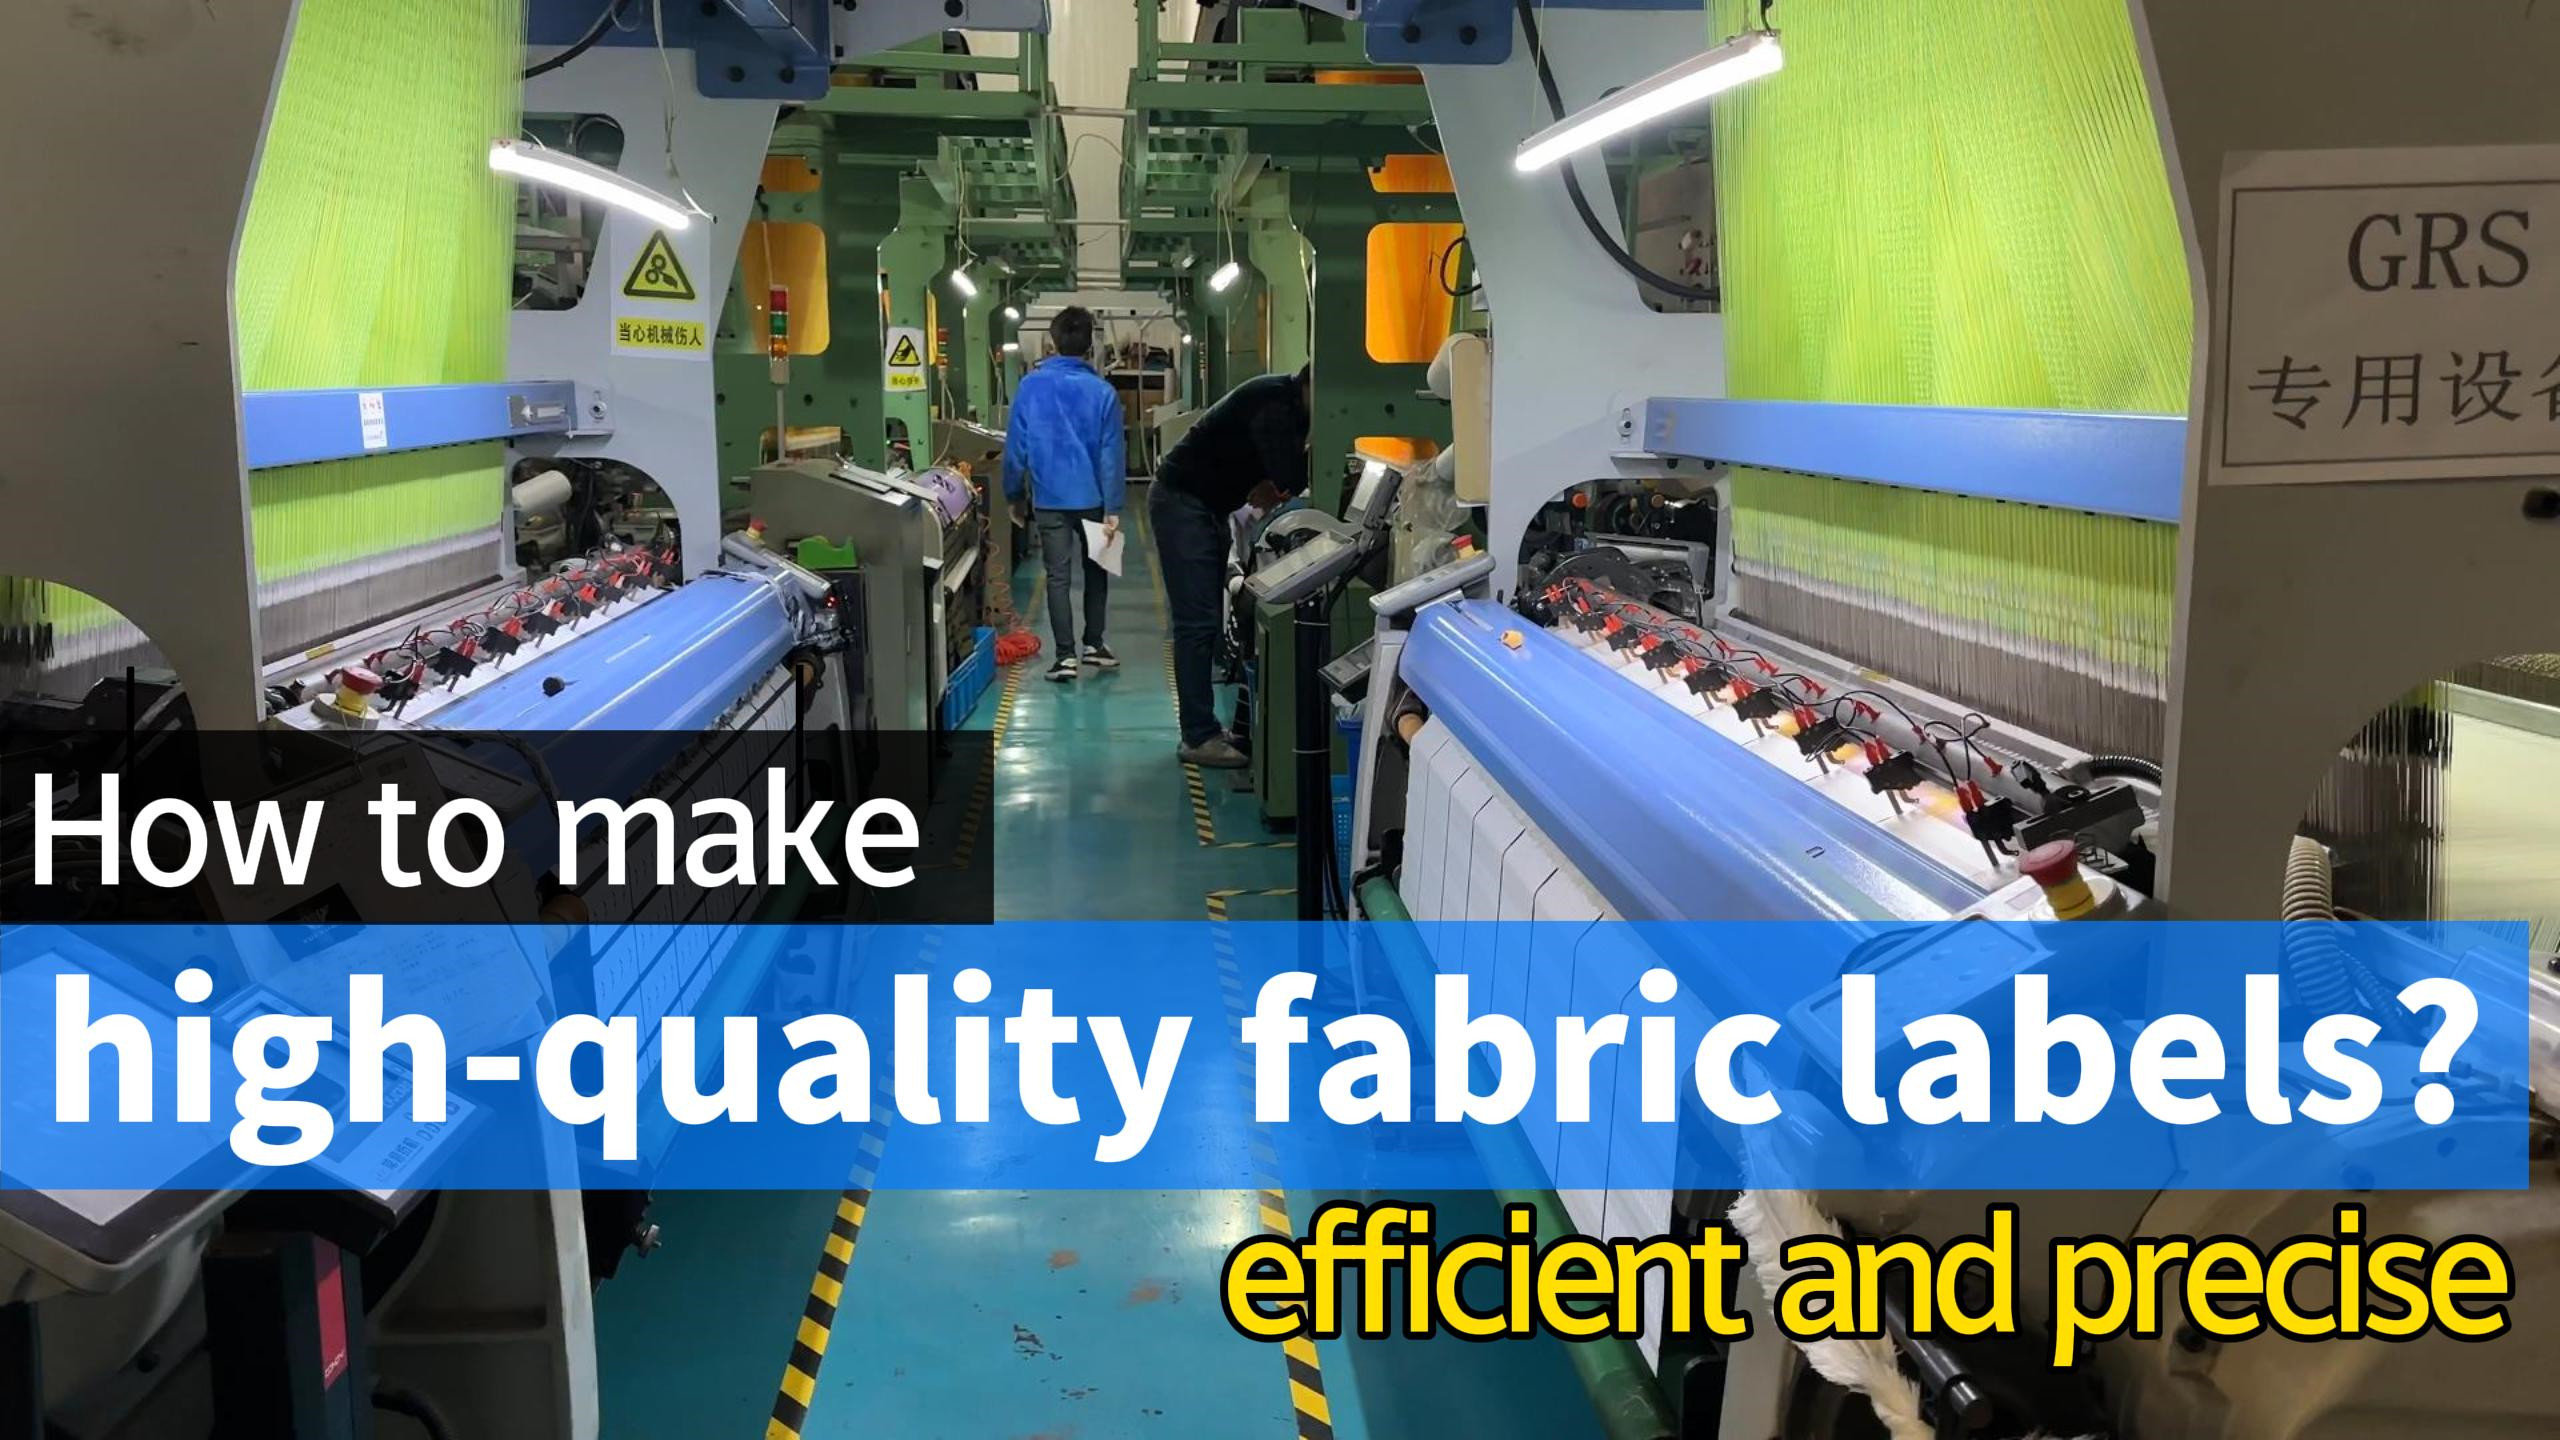 How to make high-quality fabric labels